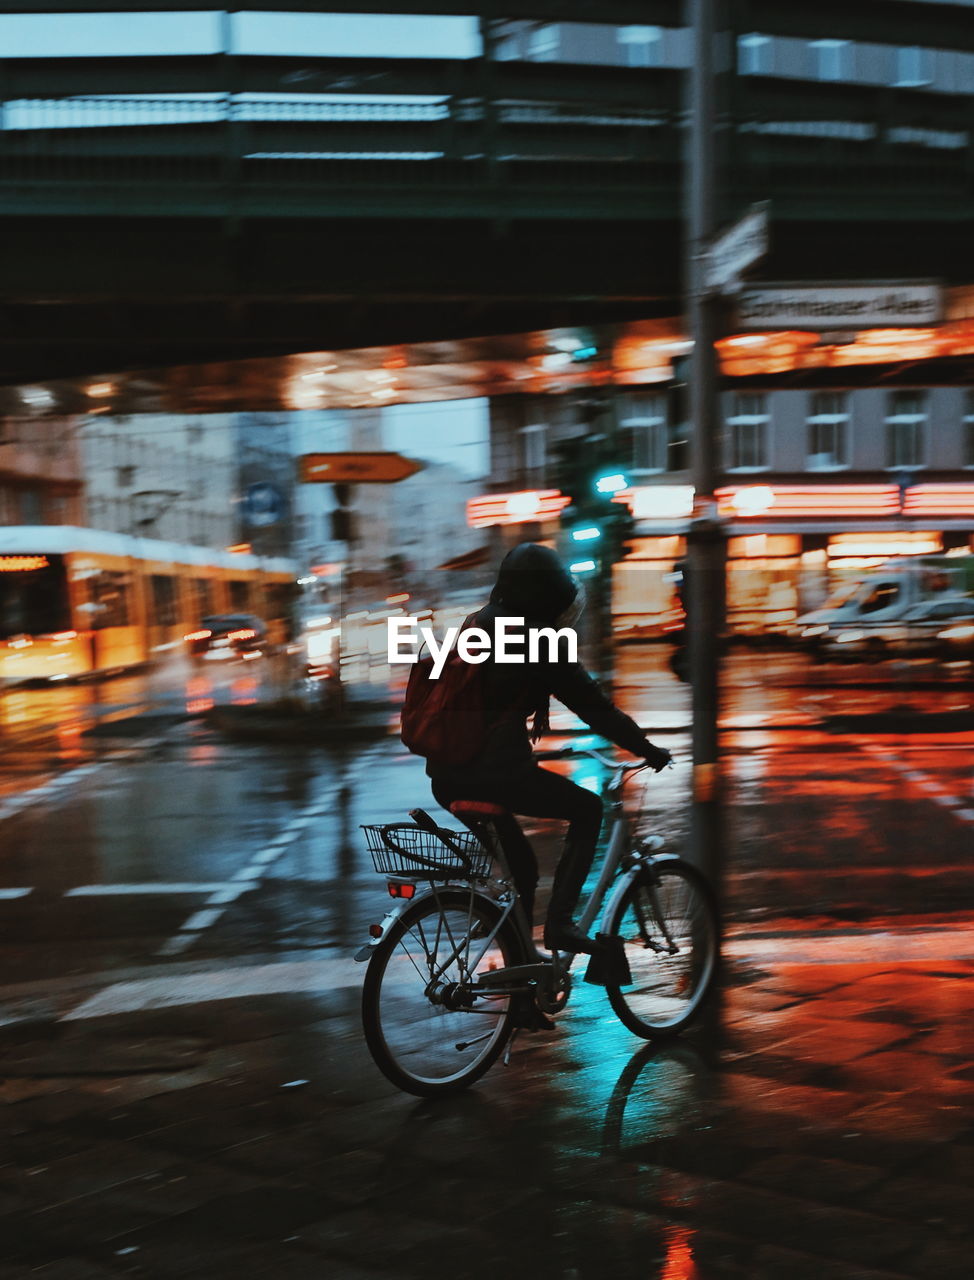 Person riding bicycle on road in city at night